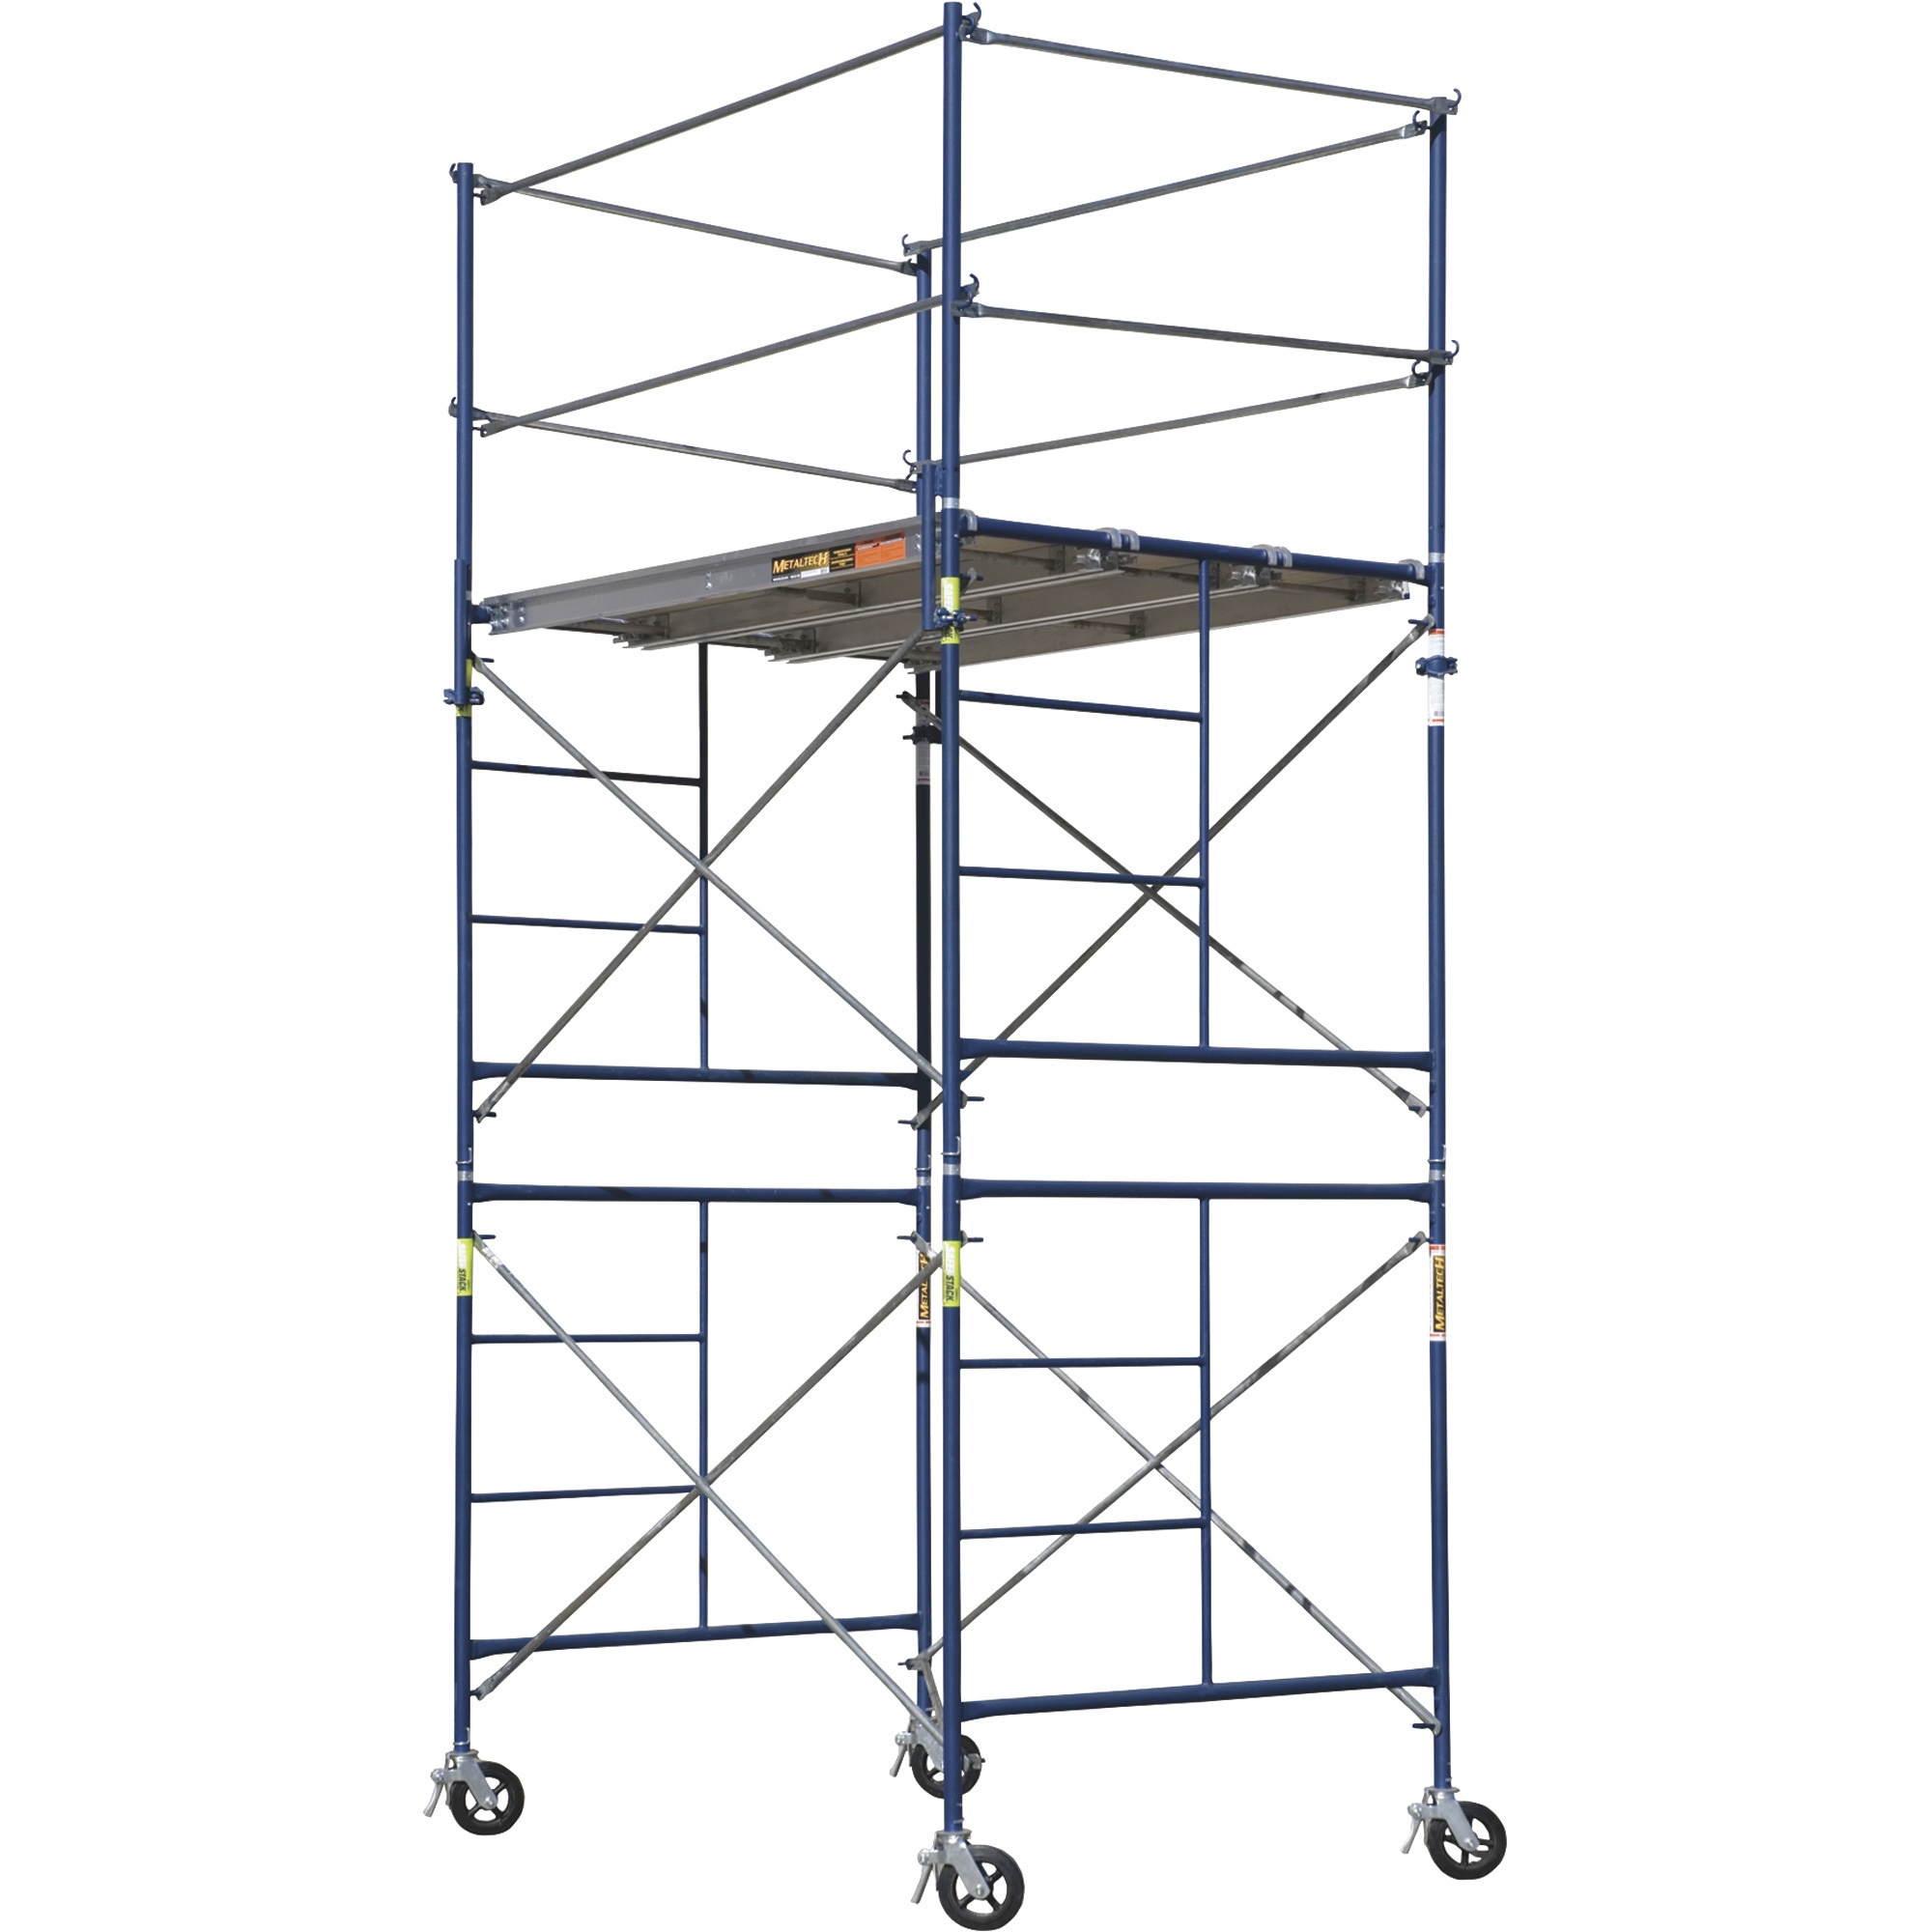 Metaltech Saferstack Complete 2-Section High Tower Scaffolding System, Model M-MRT5710